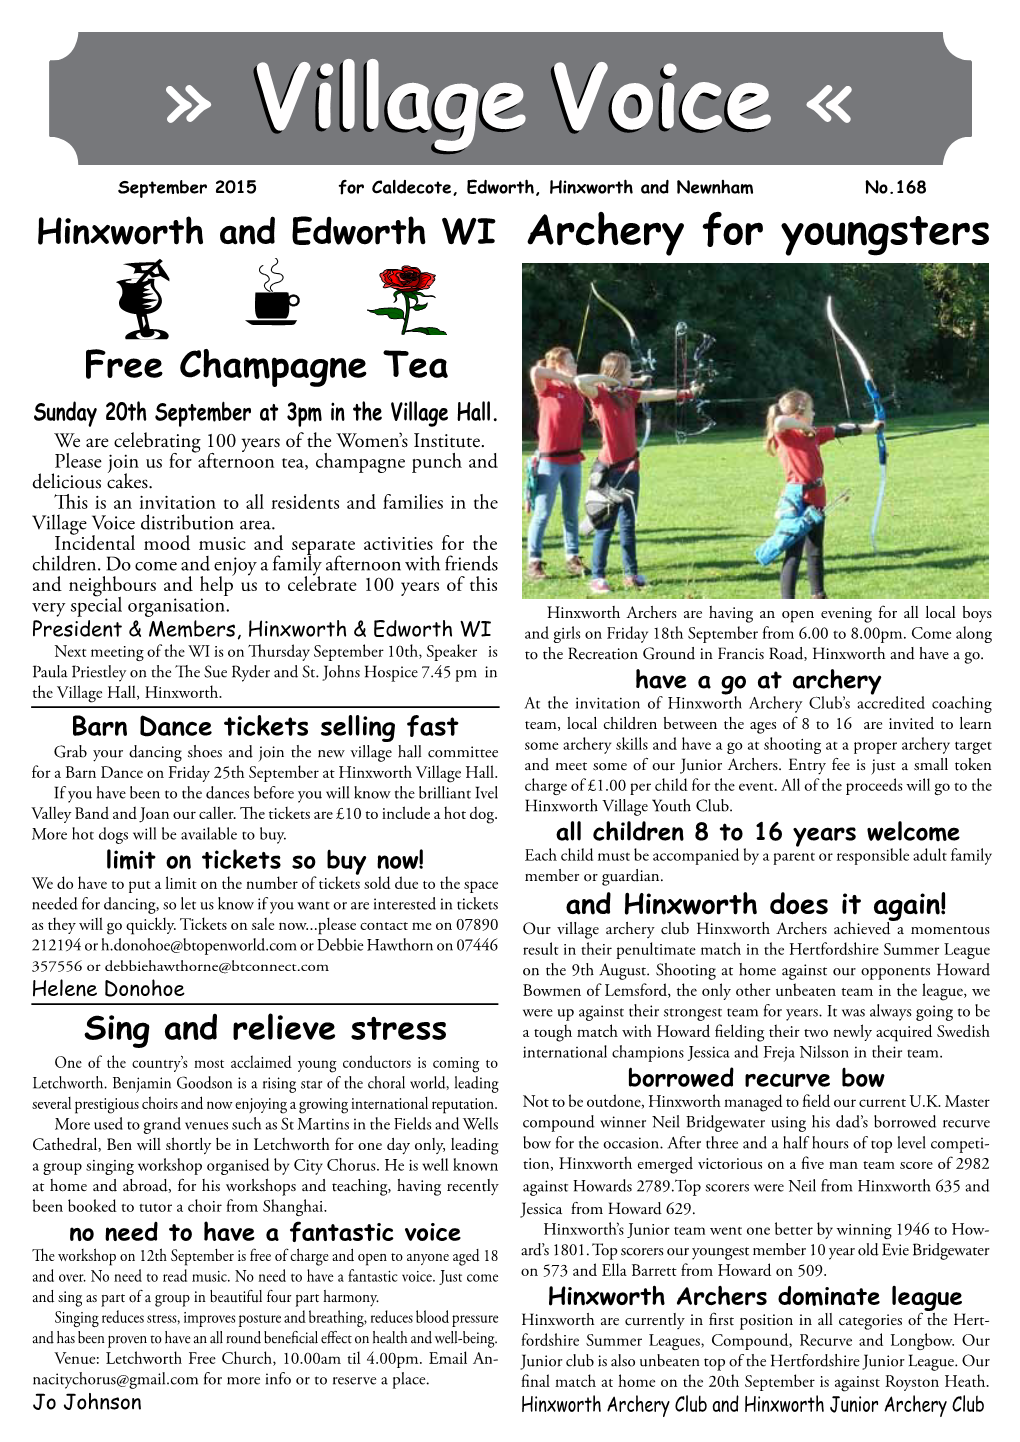 Village Voicevoice « September 2015 for Caldecote, Edworth, Hinxworth and Newnham No.168 Hinxworth and Edworth WI Archery for Youngsters